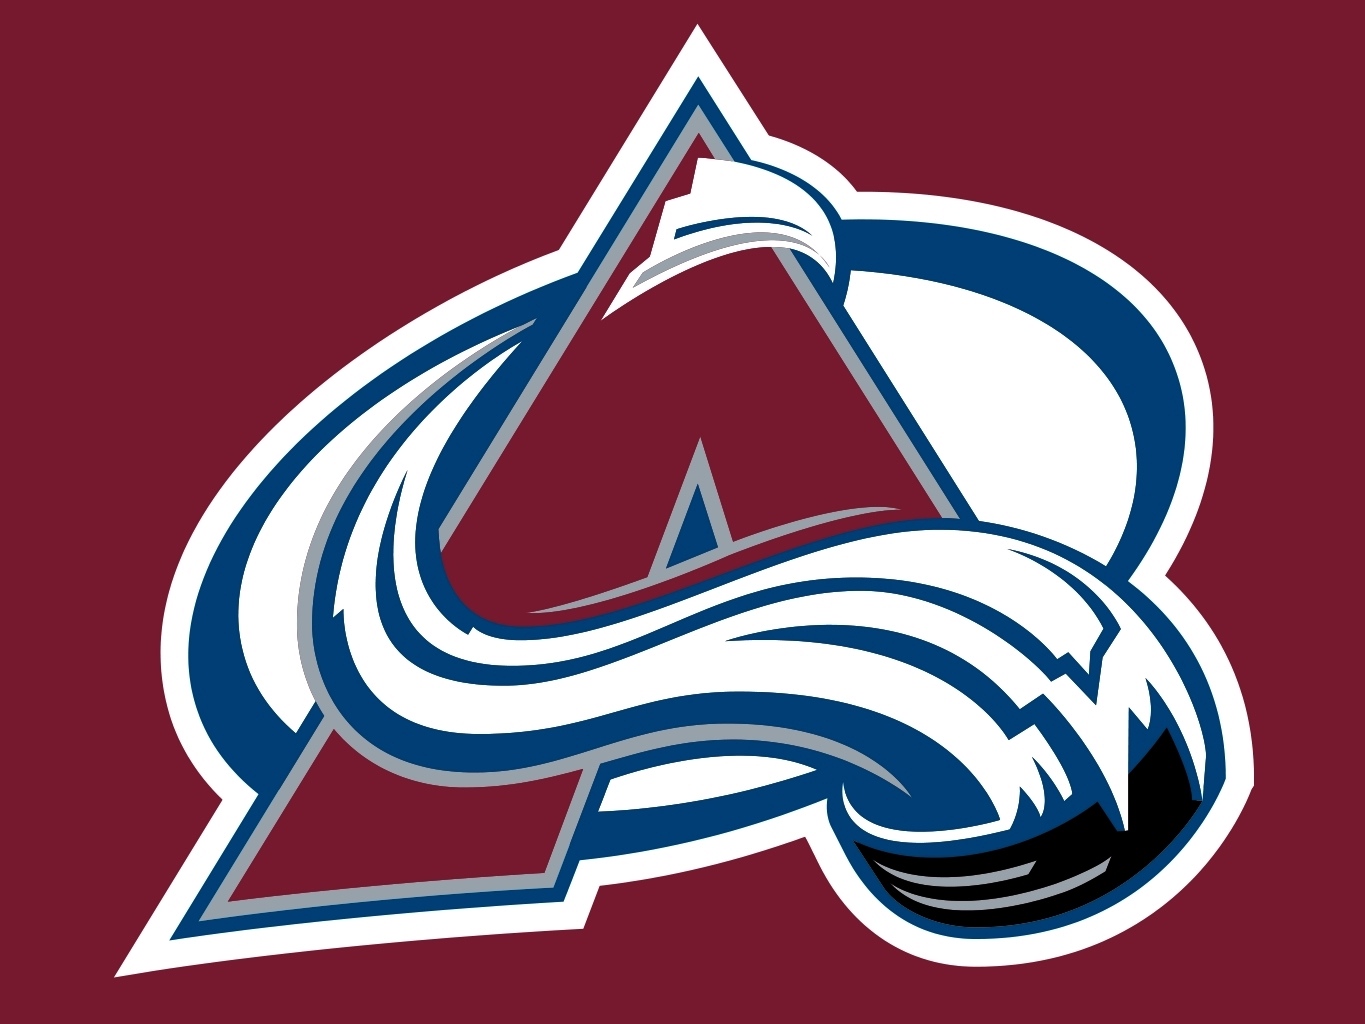 Avalanche exec: Next season presents 'opportunity' to wear Nordiques jerseys